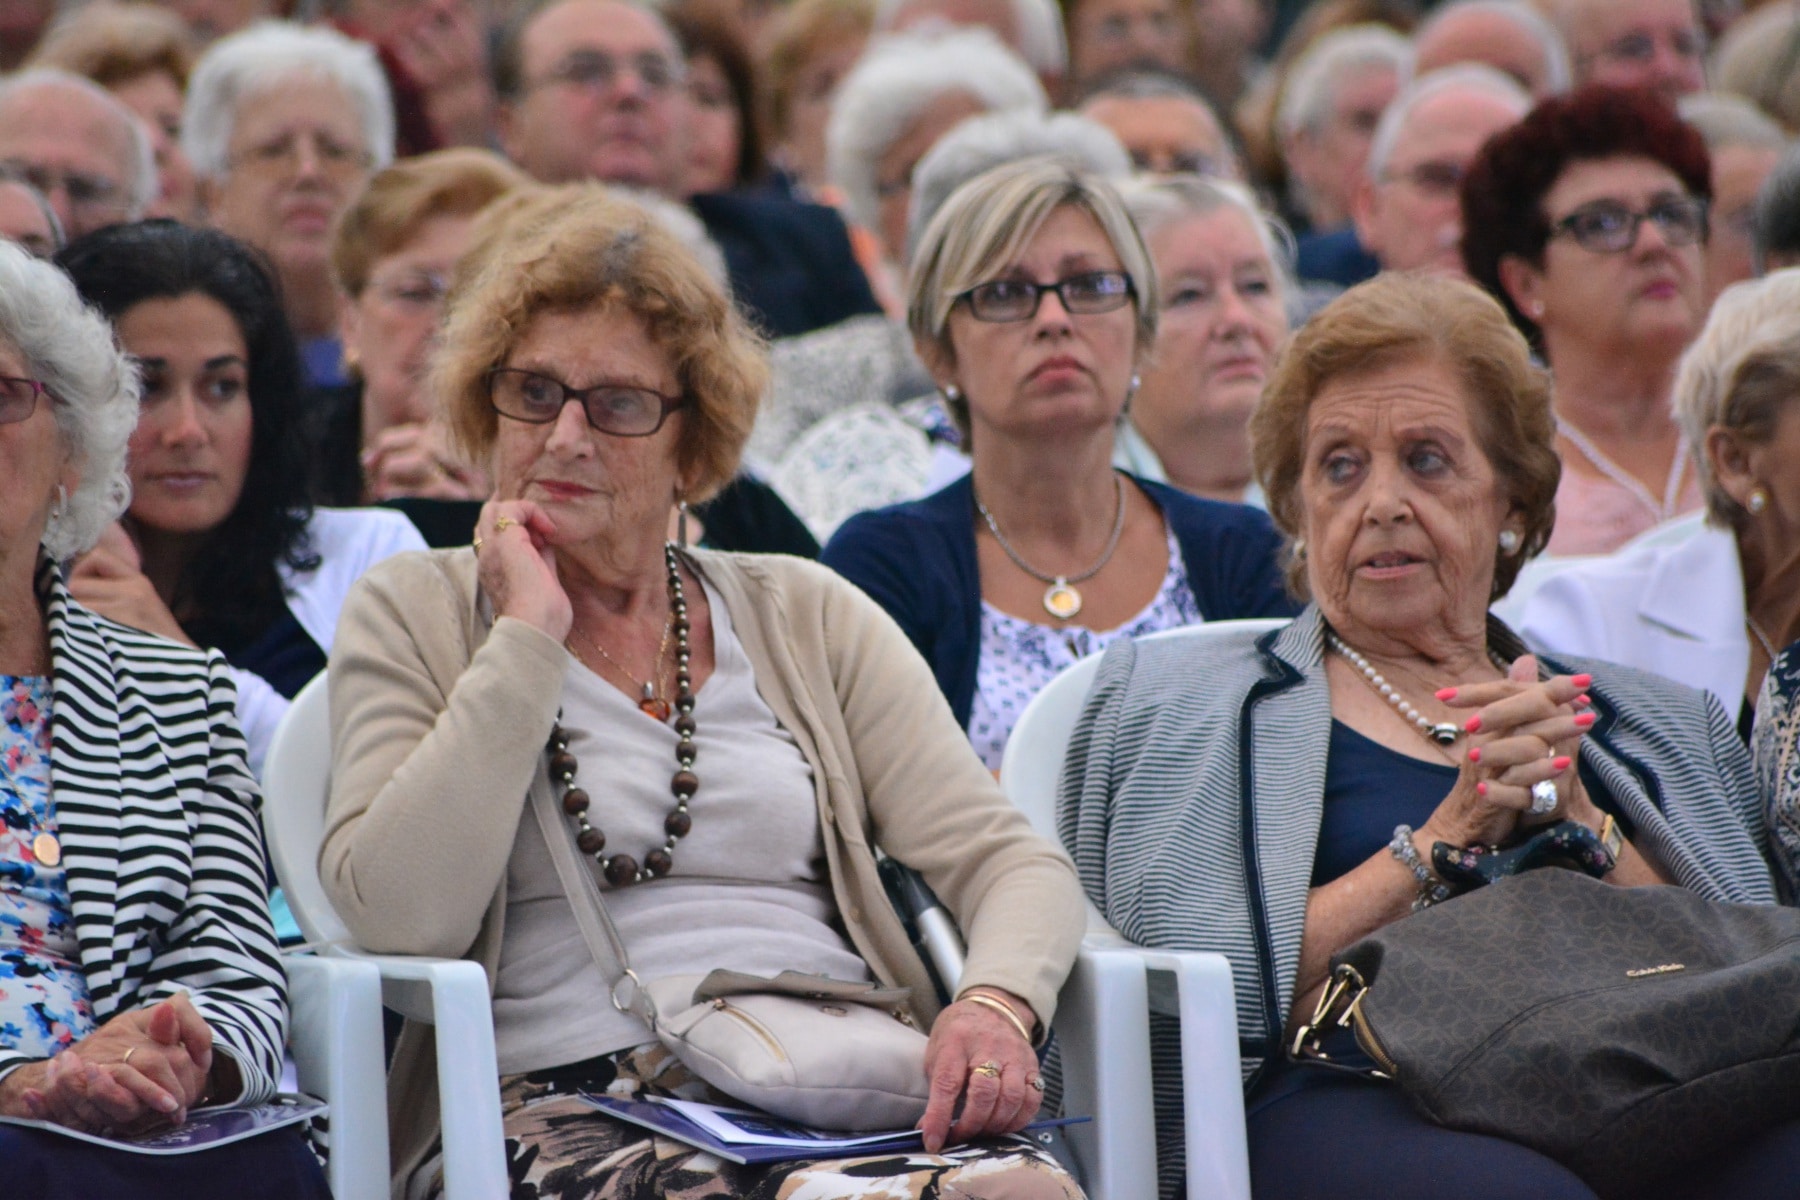 Gibraltar - 7th September 2015 - Gibraltar celebrated its first official Evacuation Commemoration Day with a concert hosted by the government of Gibraltar for some 800 evacuee survivors from the Second World War. The concert was held at the Victoria Stadium using the same stages and facilities used the day earlier by the Gibraltar Music Festival.Evacuation Commemoration Day was officially introduced earlier this year after Gibraltar celebrated 75 years since the whole of the Gibraltar population was evacuated during the second World War. Many of the Gibraltarians were taken to London where some died during the London blitz. Whilst most stayed in London, others were taken to Northern Ireland, Madiera and Jamacia. It was only a confrontation between population leaders that Gibraltarians were allowed back on the Rock after British officials had initially refused to return the population back to its rightful home.